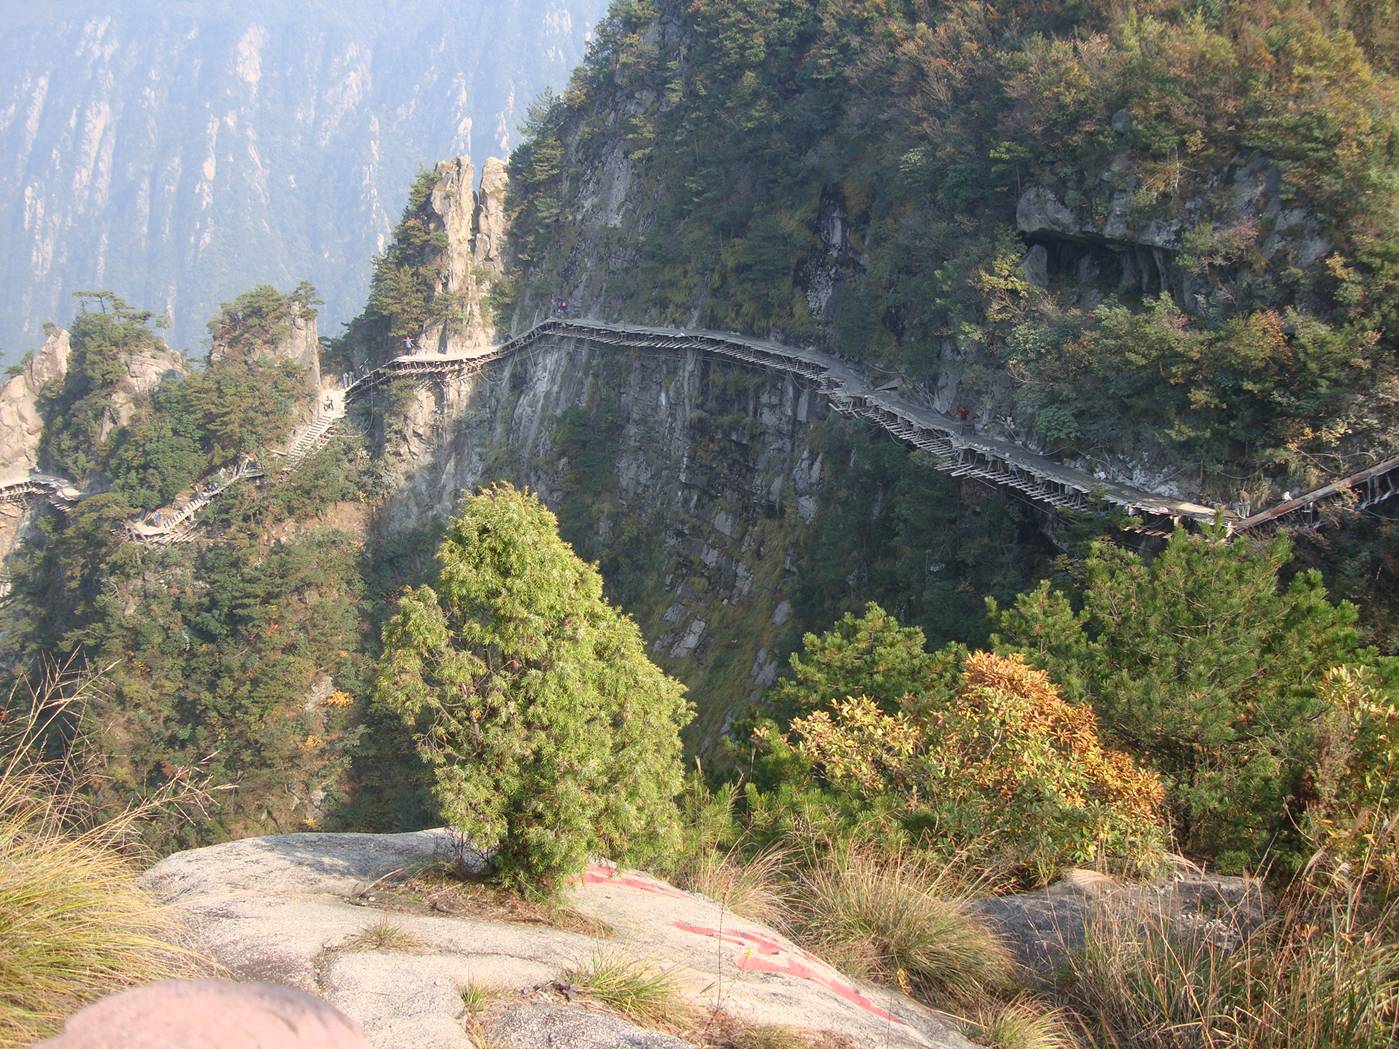 Picture: The mountain side impossible sidewalk under construction.  Daming Shan, Zhejiang, China